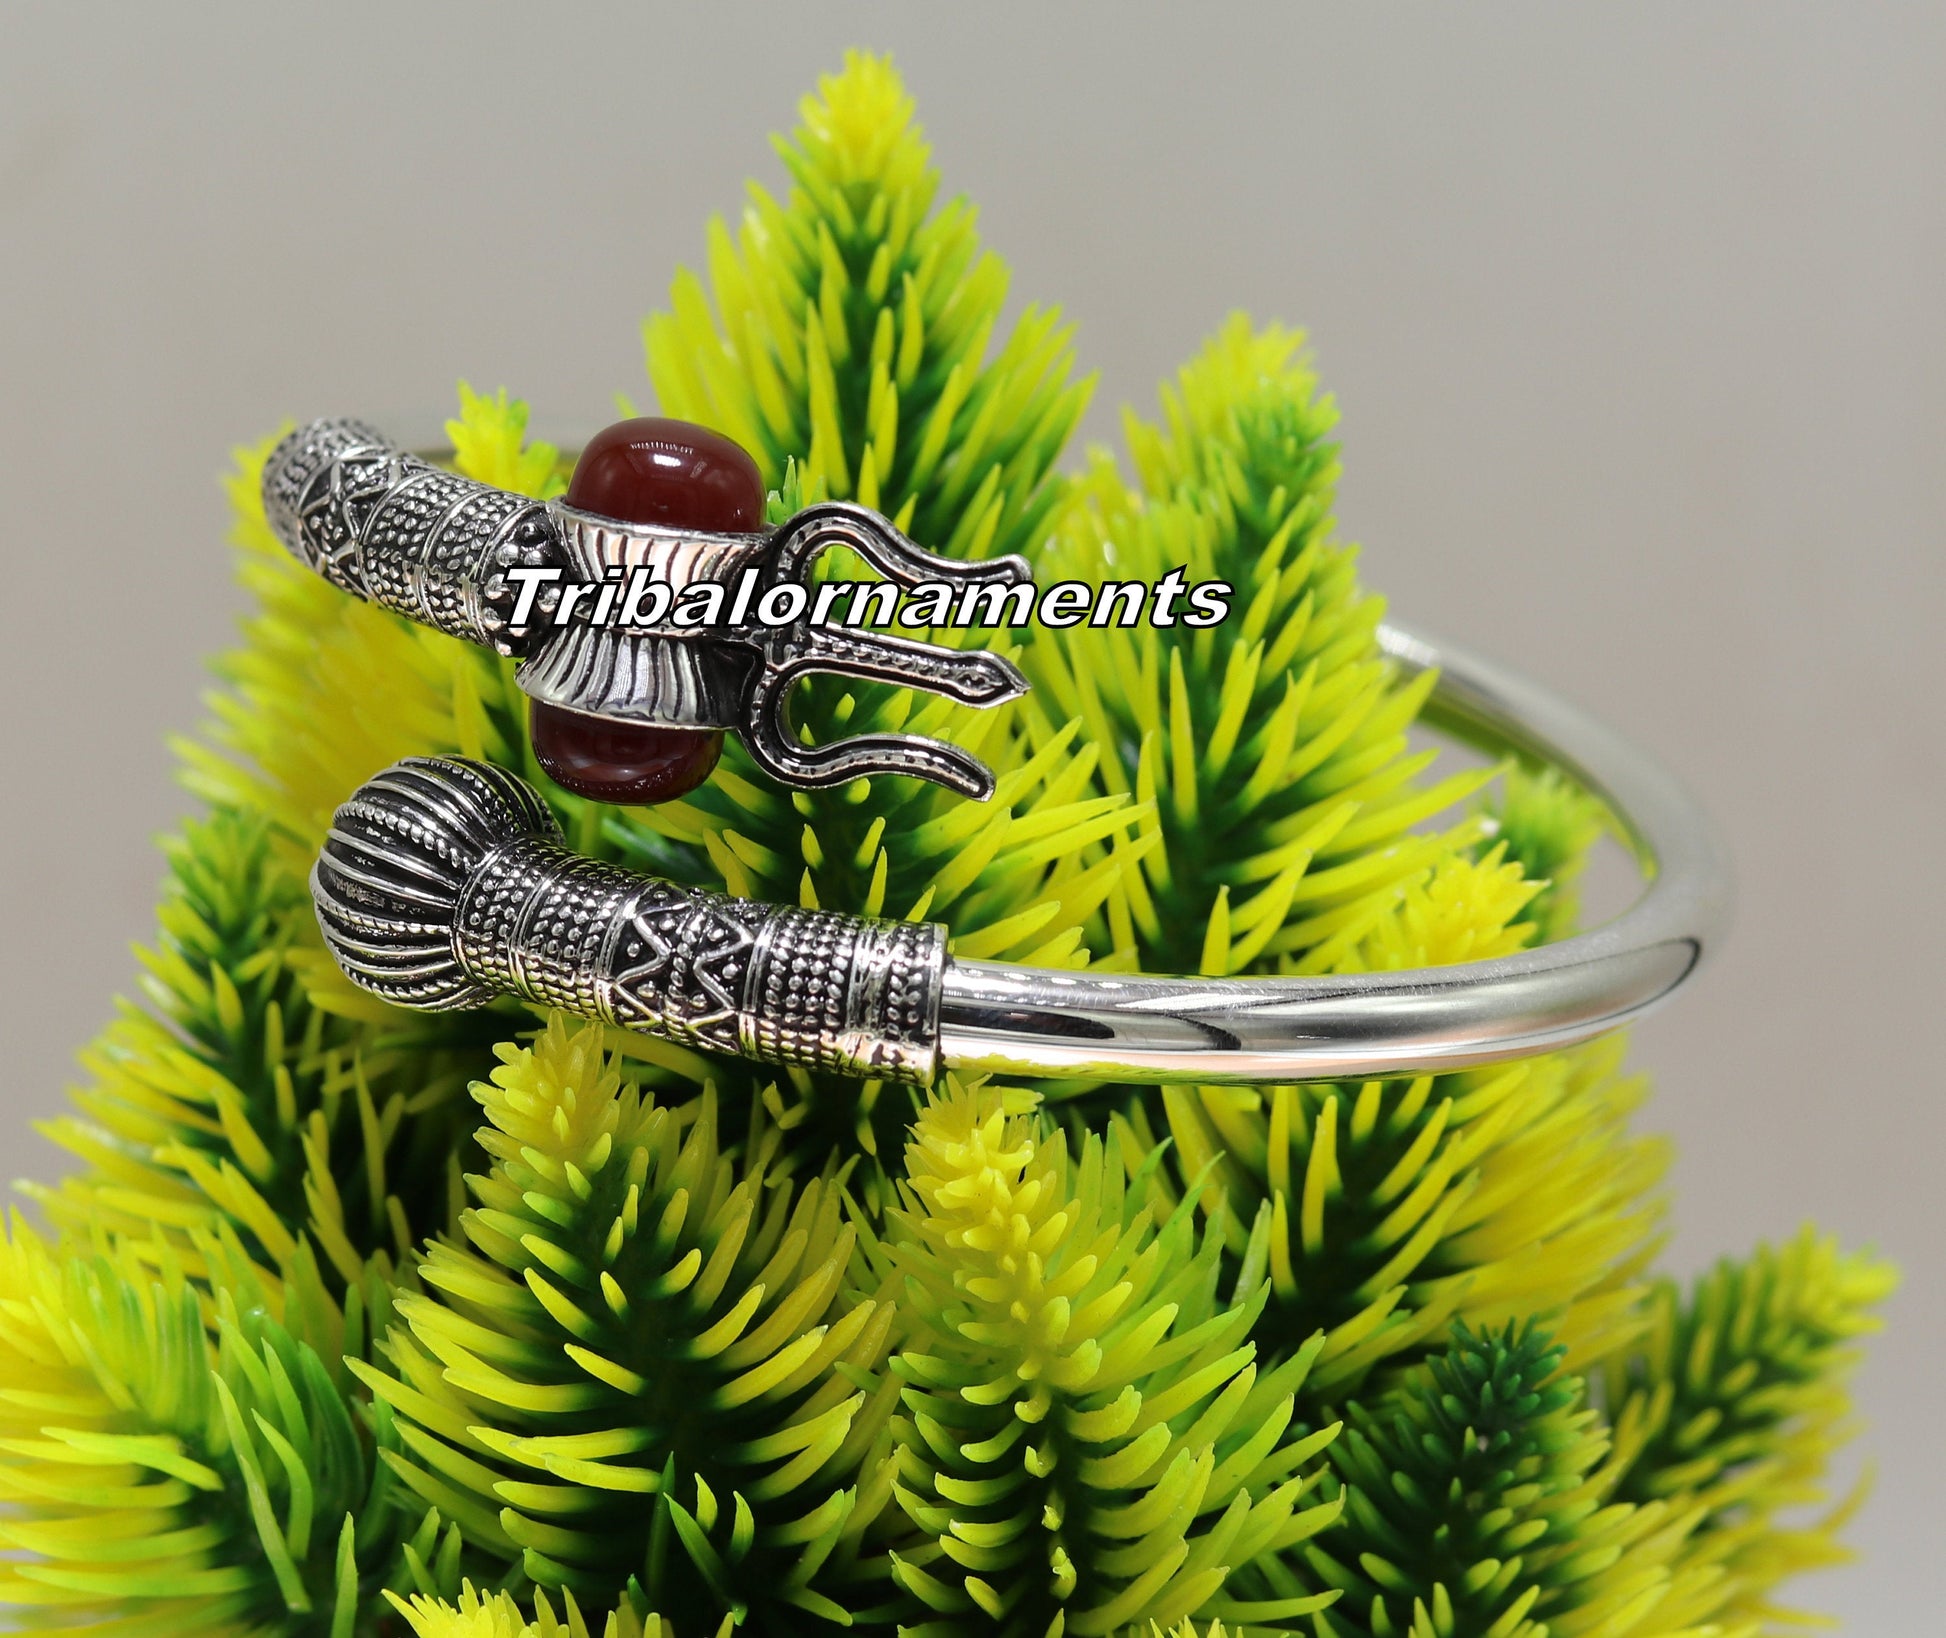 vintage design Handcrafted 925 sterling silver bangle bracelet kada excellent god shiva trident customized jewelry, excellent gifting nsk238 - TRIBAL ORNAMENTS